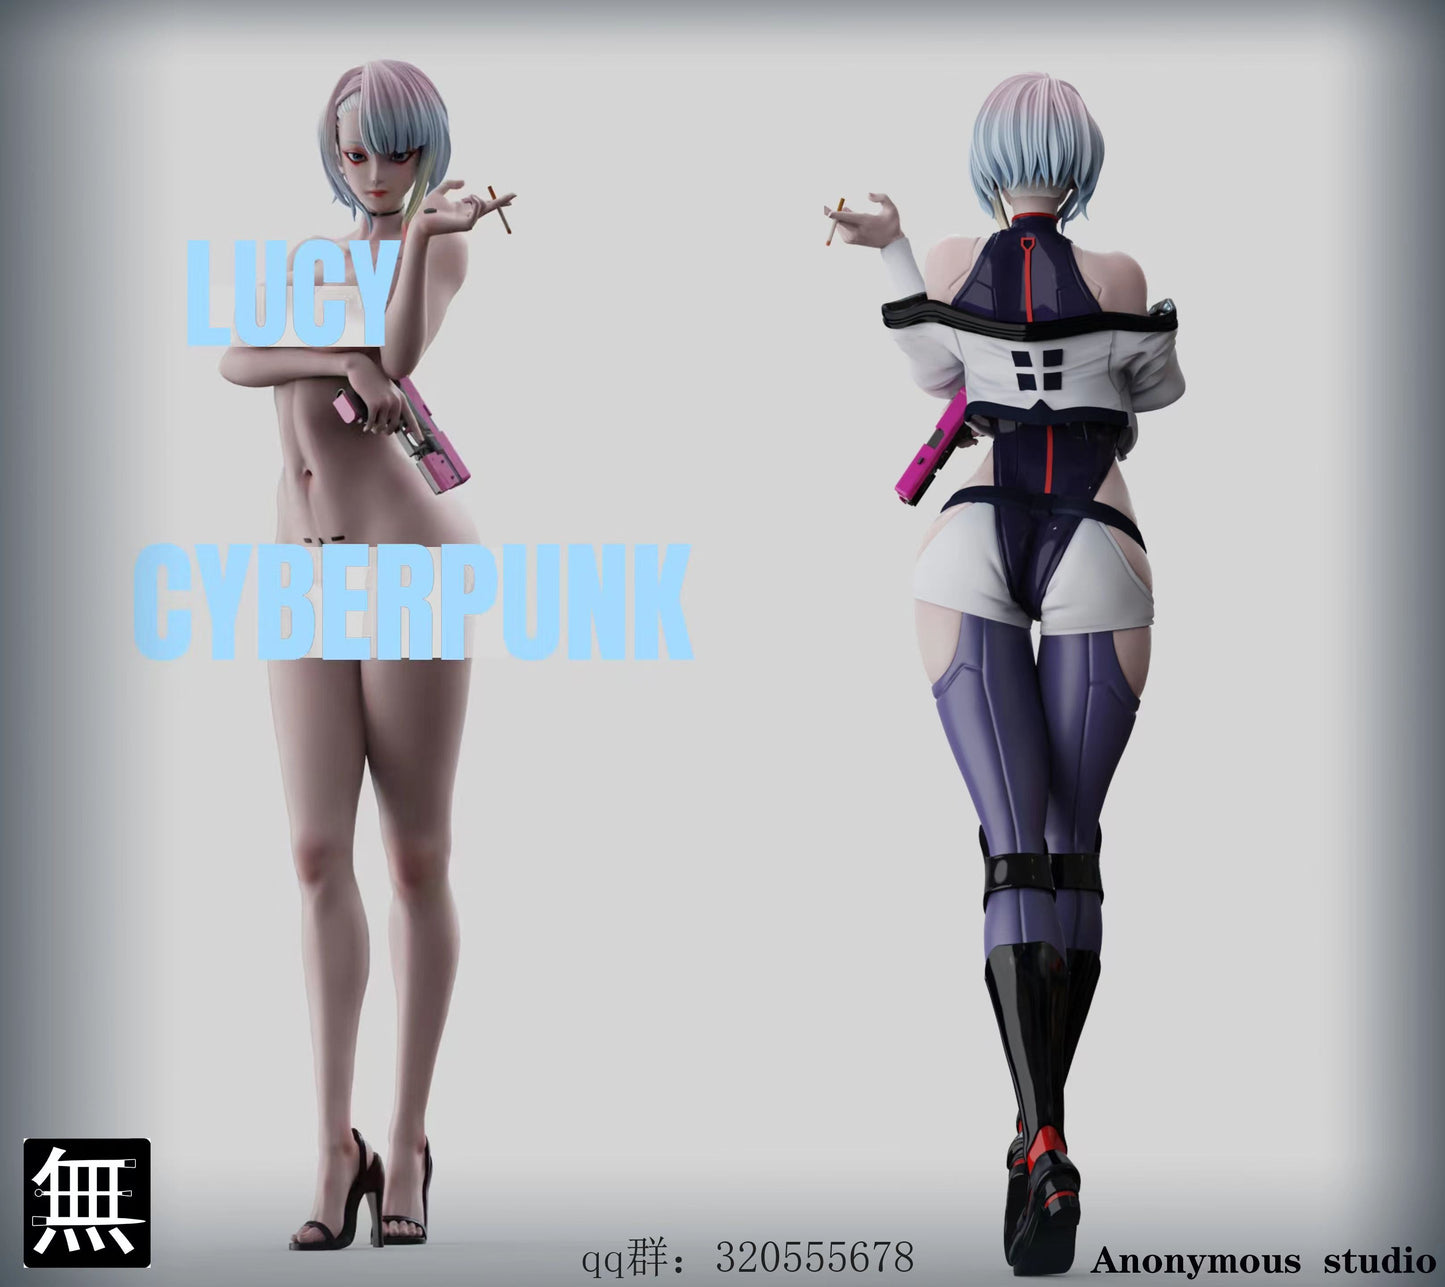 ANONYMOUS STUDIO – CYBERPUNK: LUCY [SOLD OUT]